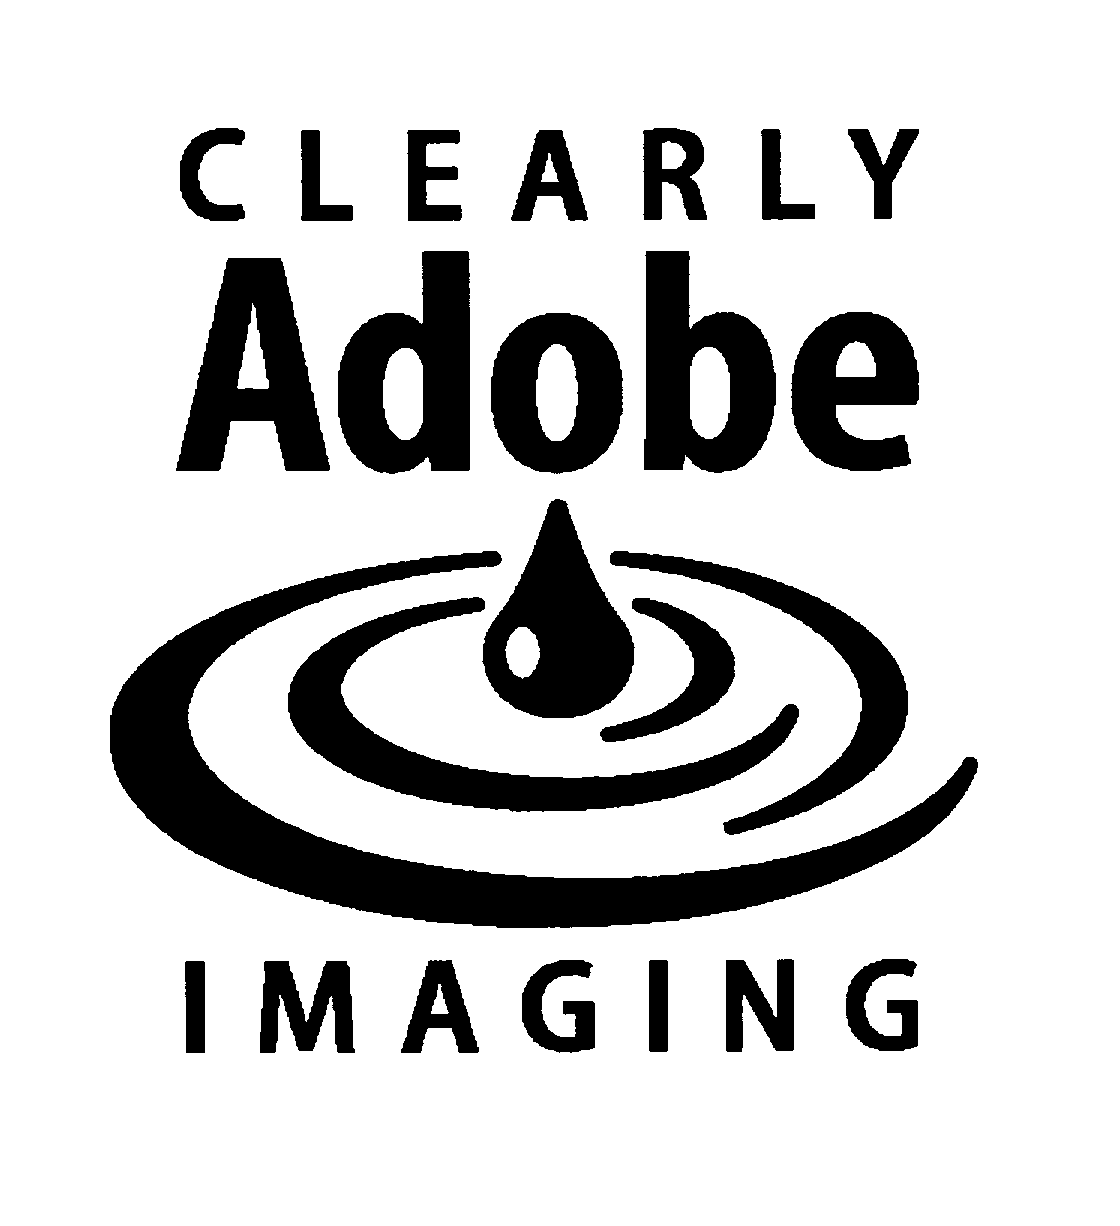  CLEARLY ADOBE IMAGING